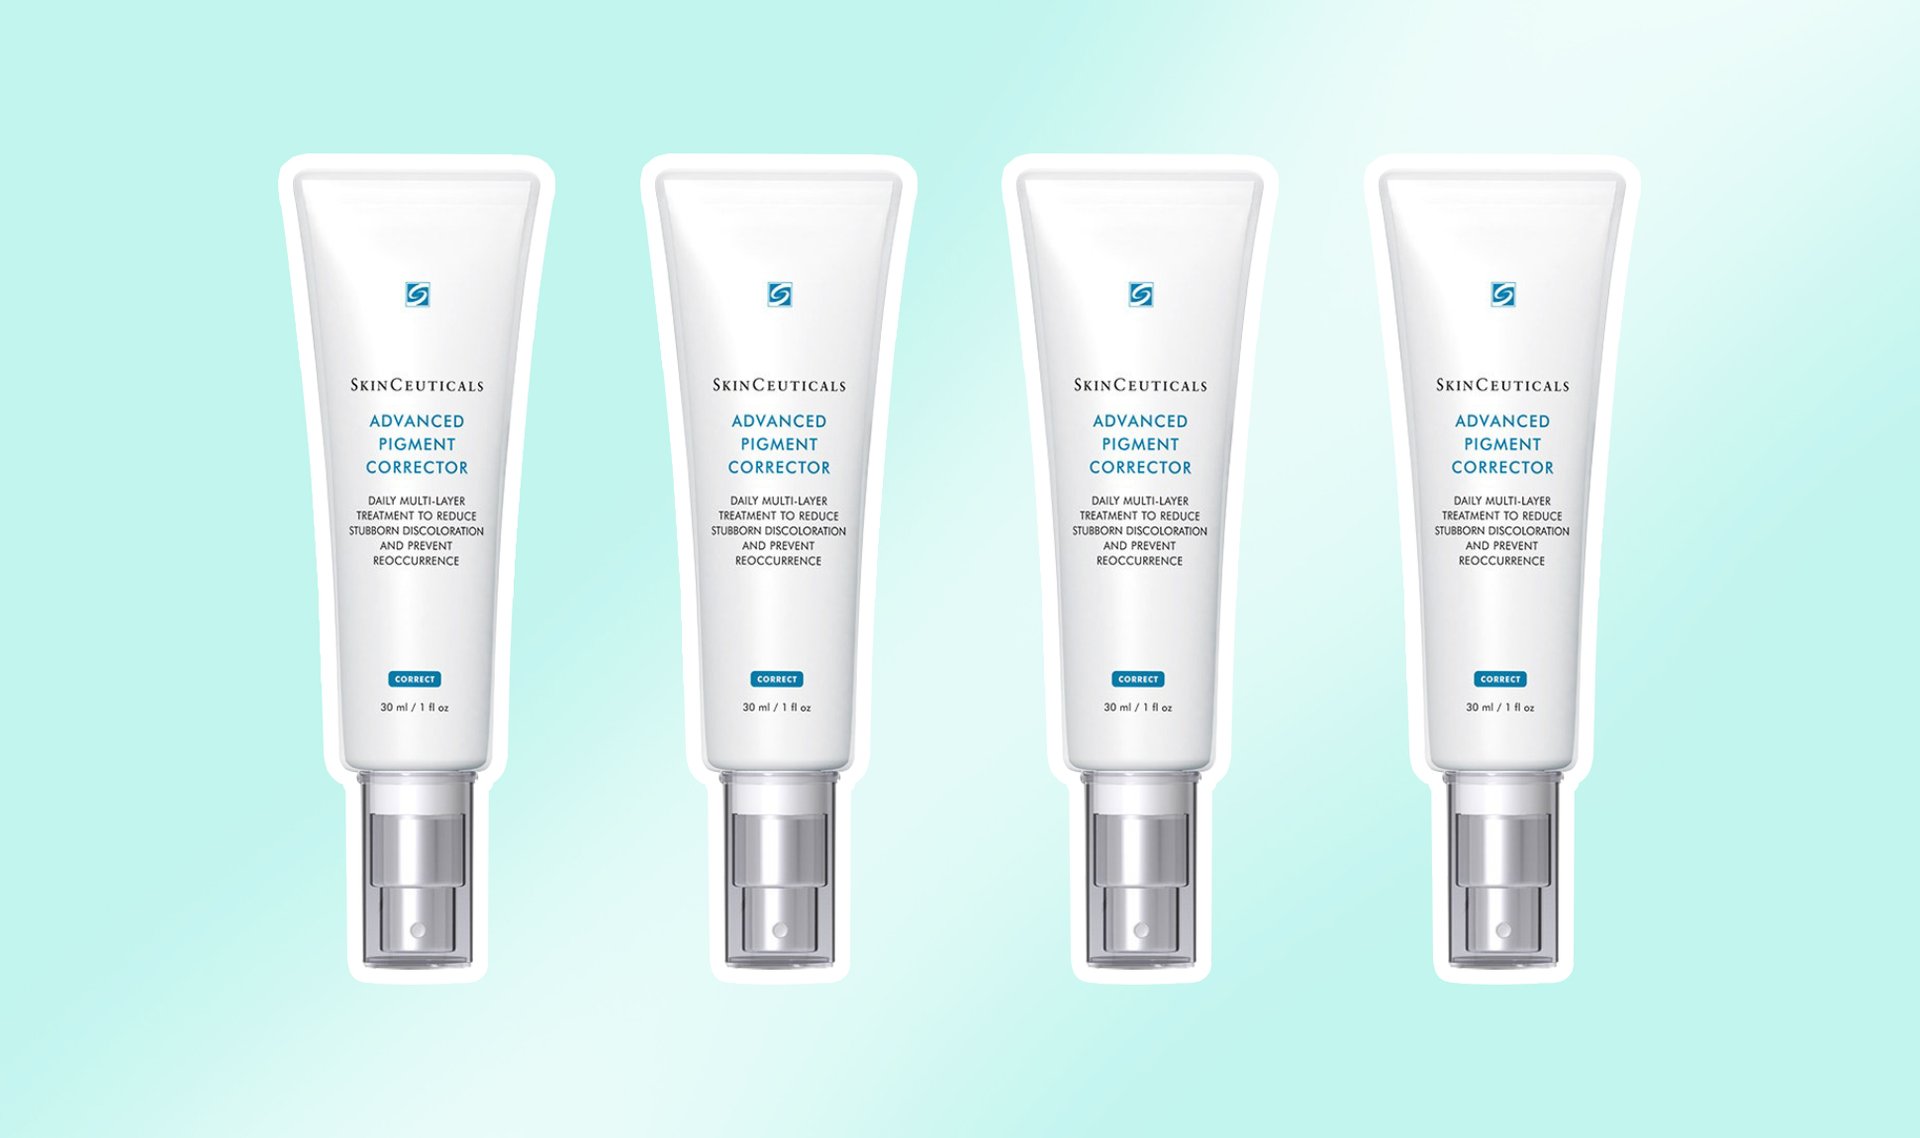 I Tried the SkinCeuticals Advanced Pigment Corrector  — Here Are My Thoughts 